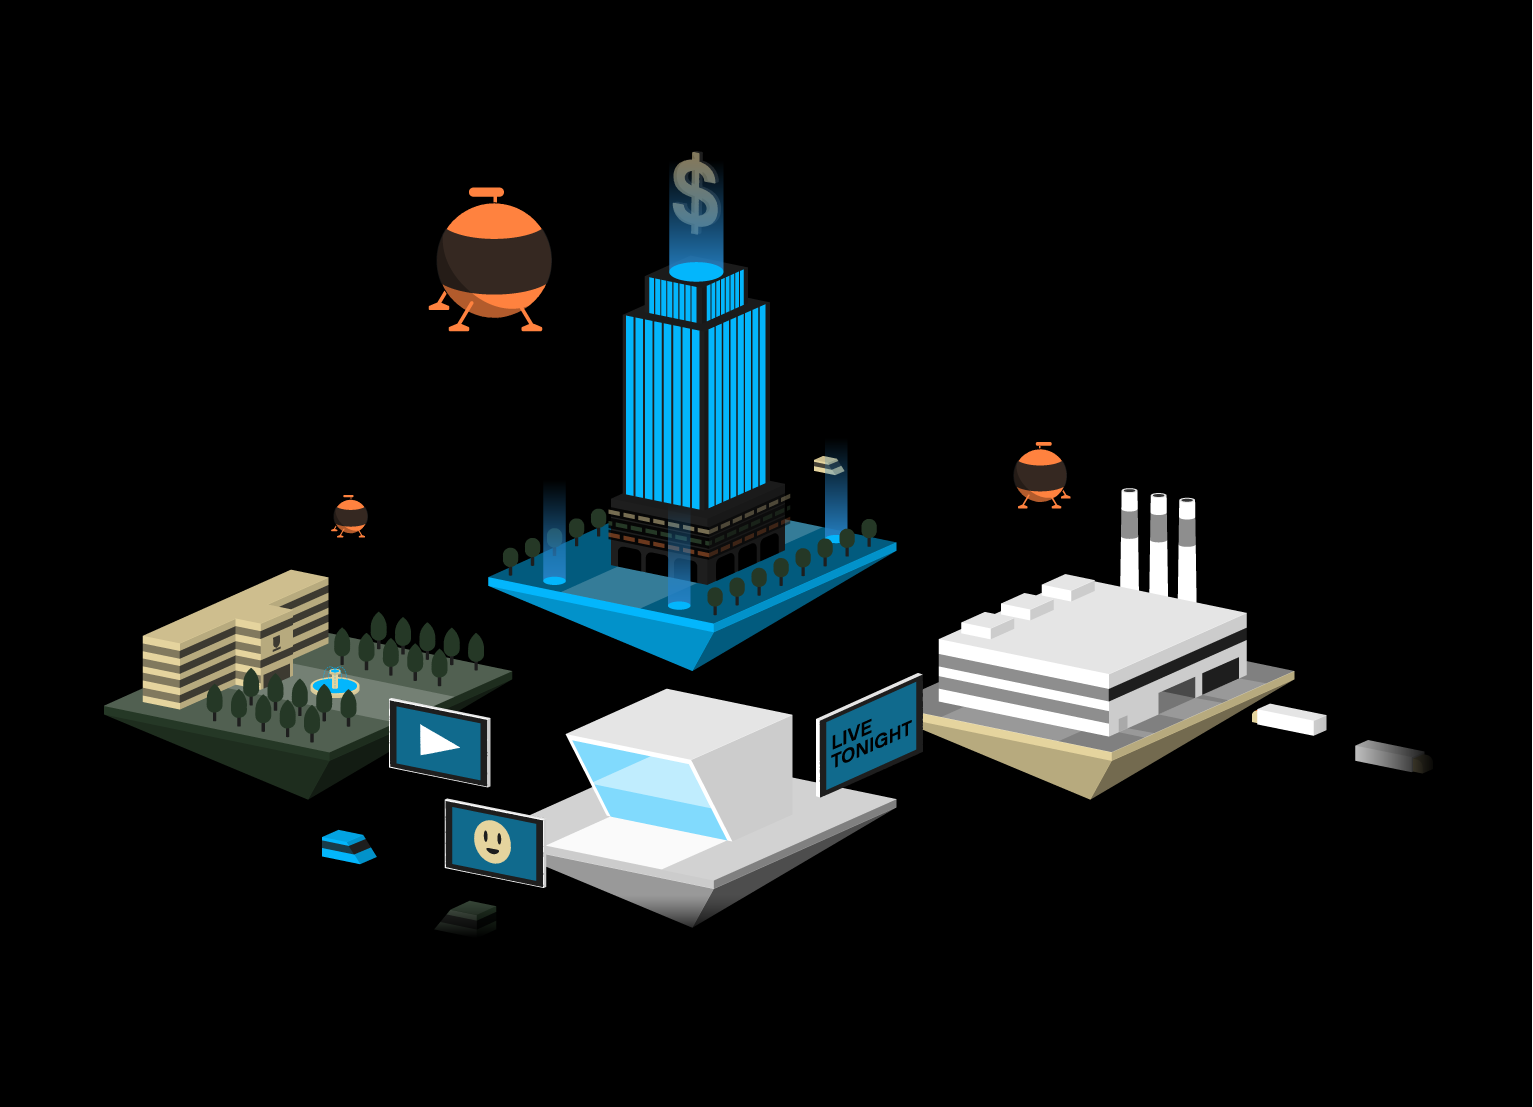 Asial - Custom Illustrations - Industry Overview page: Asial can help industries such as finance, manufacturing, education or media visualized as a futuristic city.